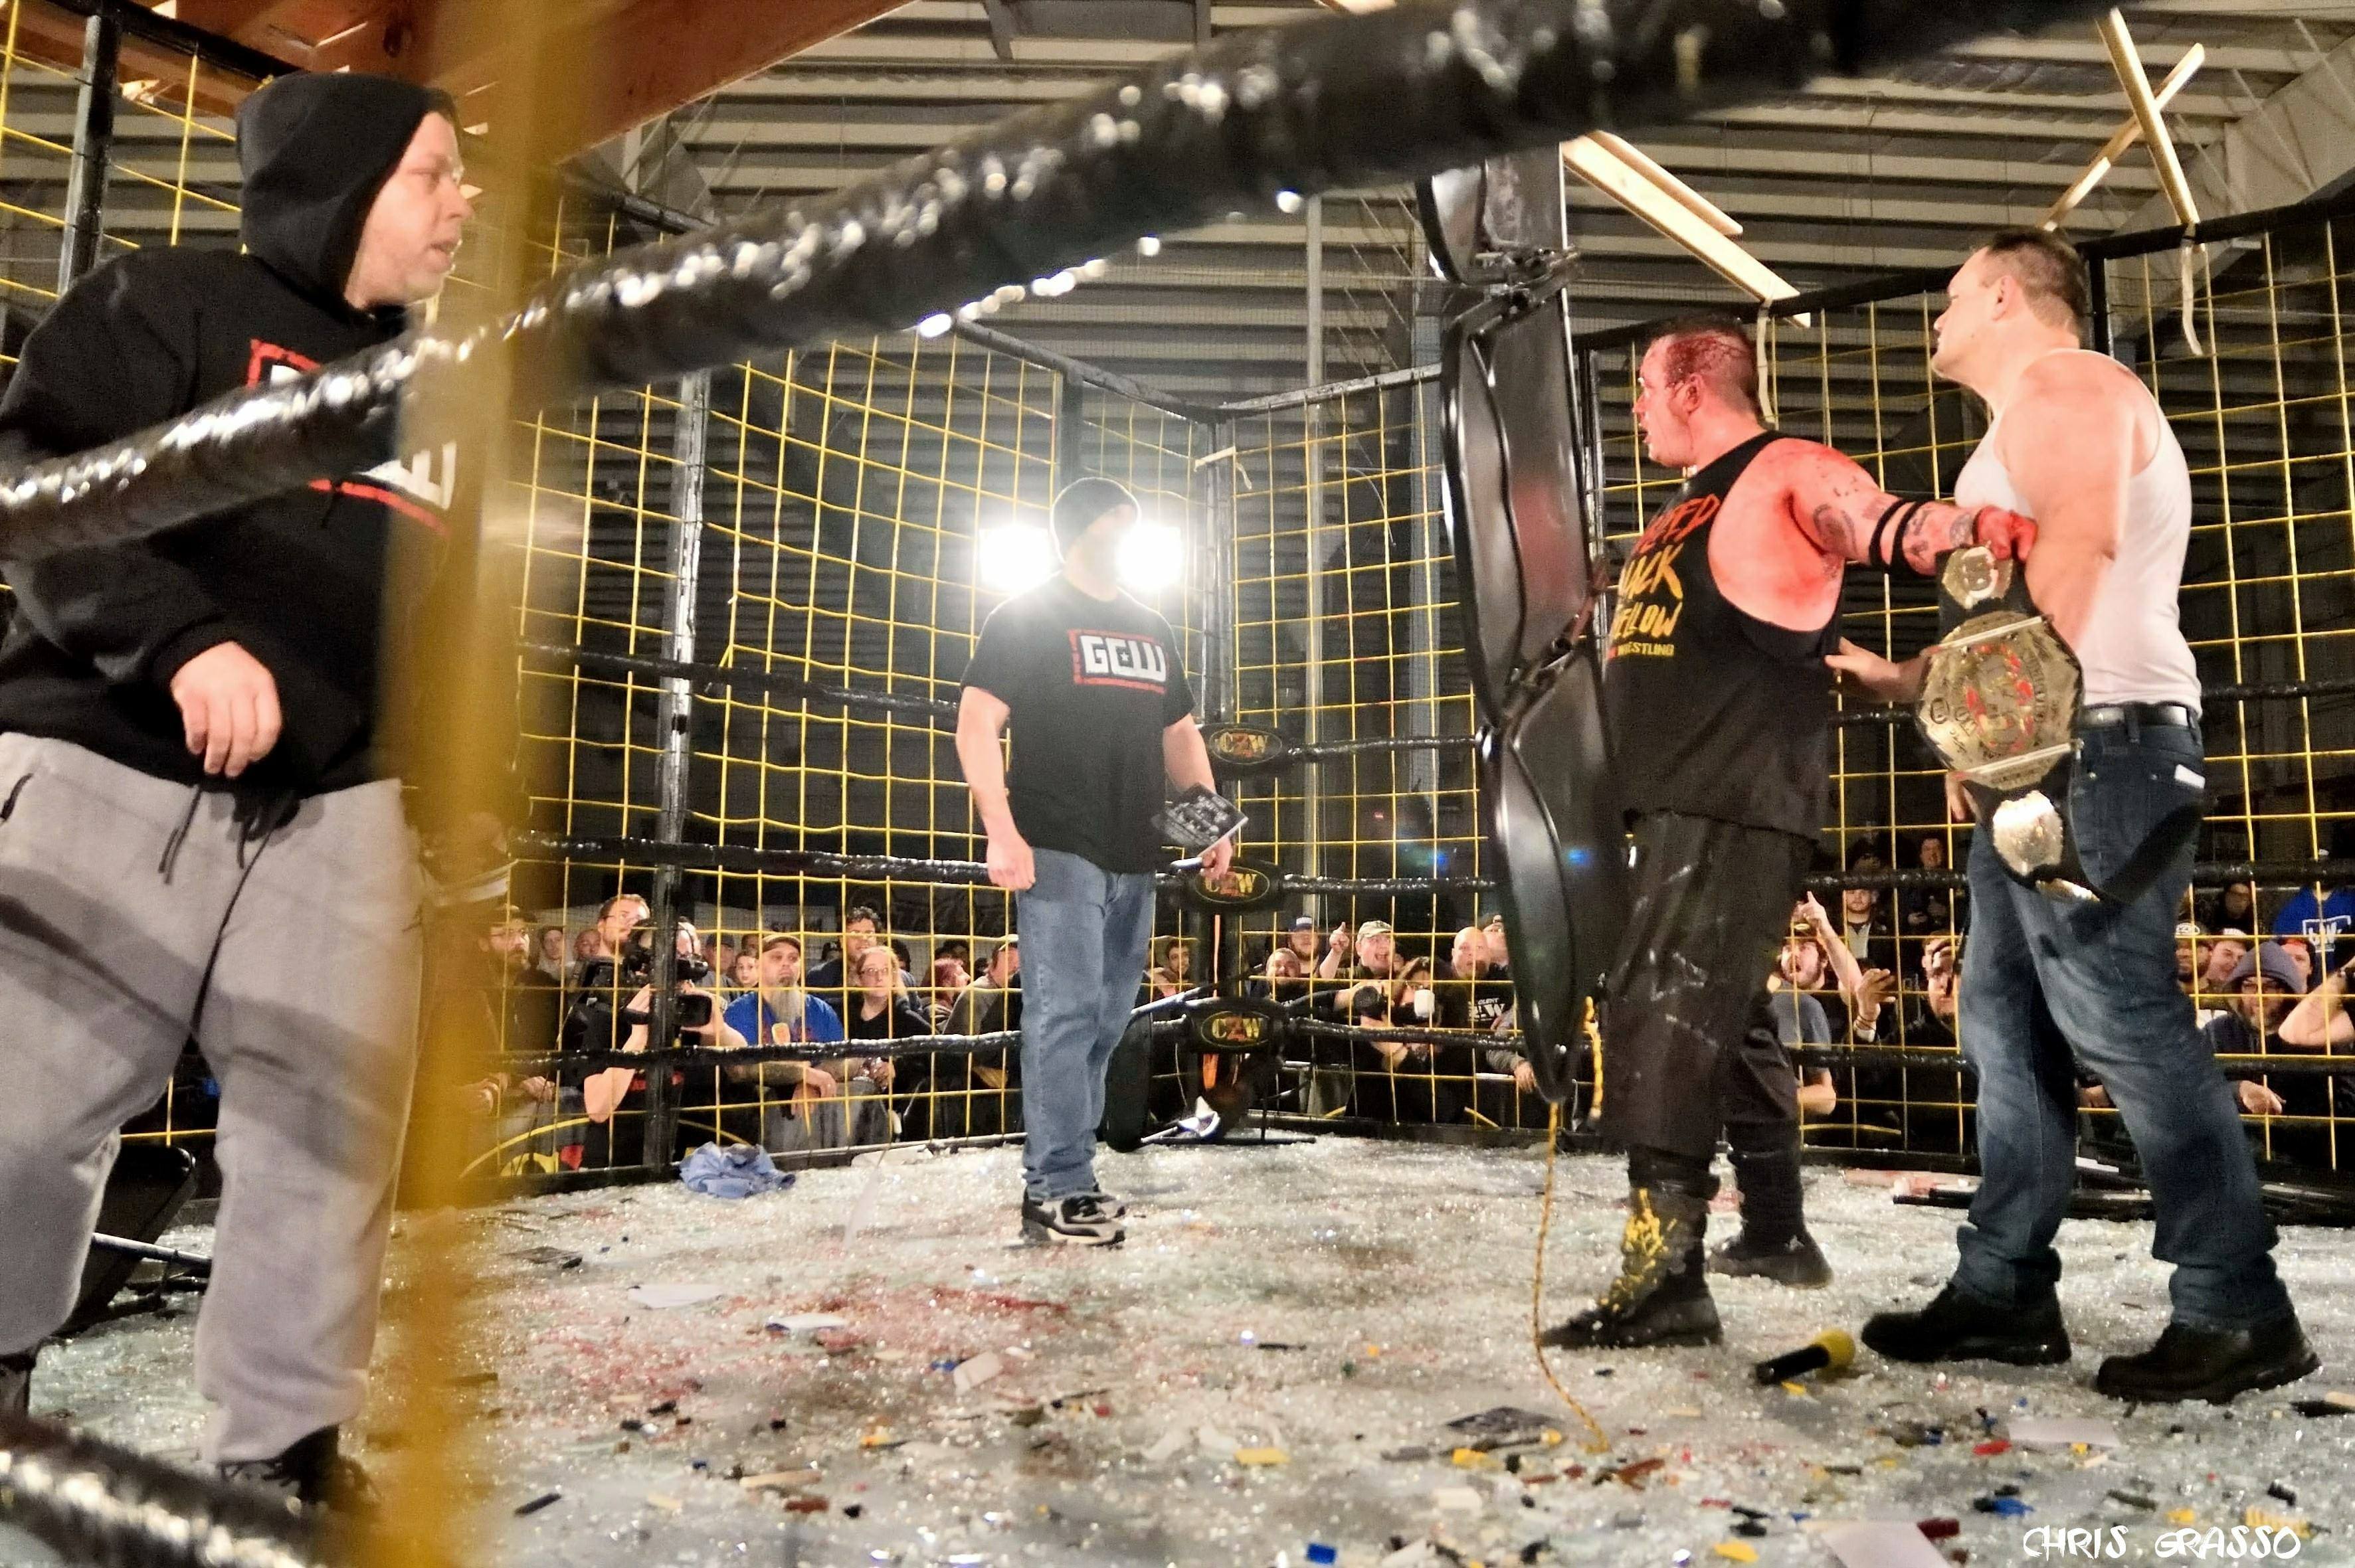 Exclusive: GCW Co-Owner Brett Lauderdale Tells Crazy Story Behind Controversial Nick Gage-CZW Incident